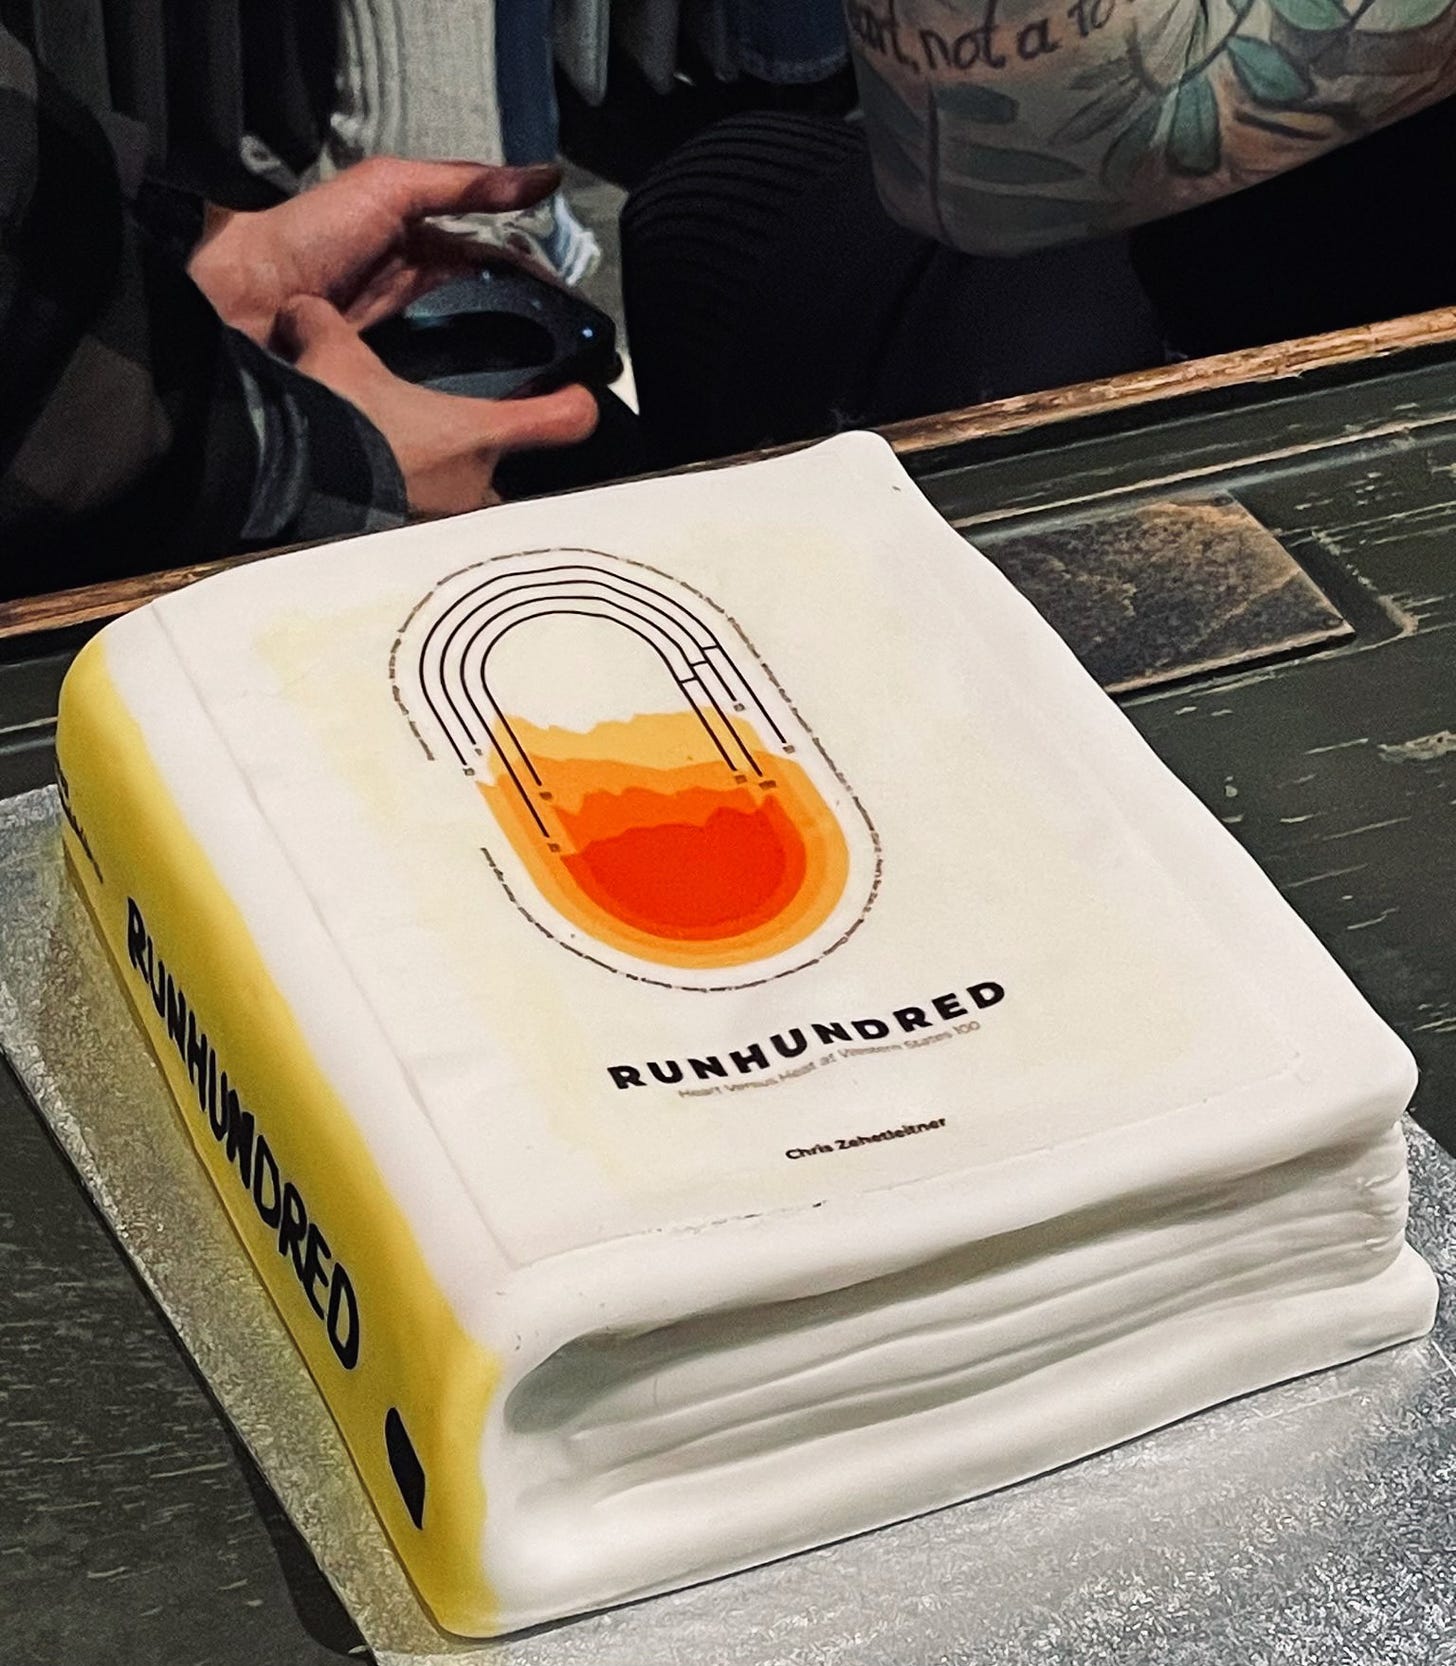 A cake in the shape and look of the Runhundred Book